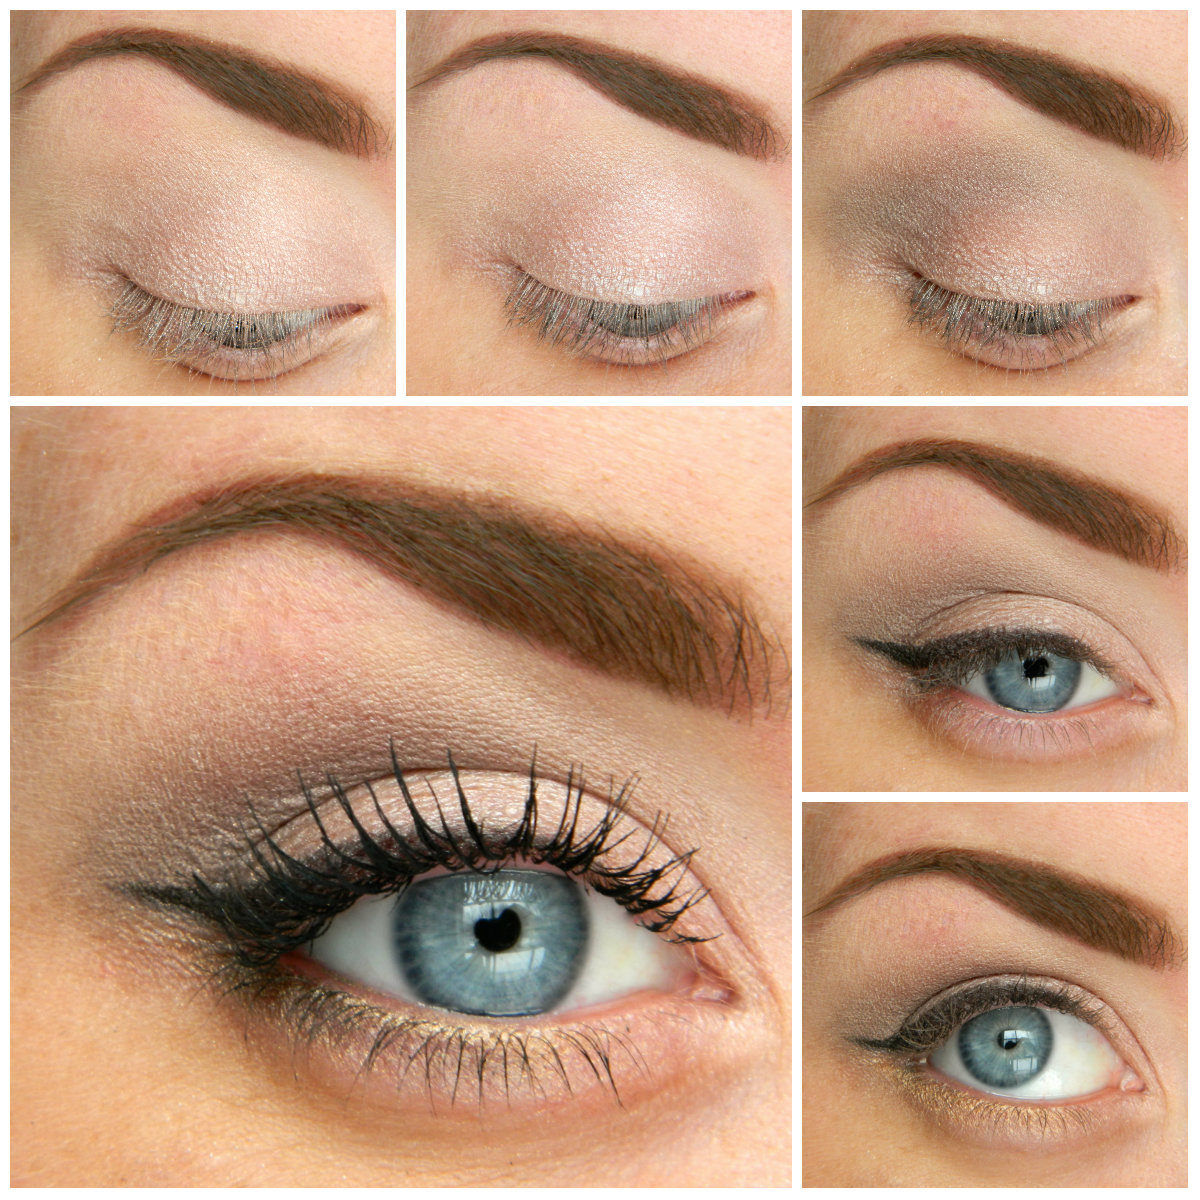 Natural Eye Makeup For Brown Eyes 5 Ways To Make Blue Eyes Pop With Proper Eye Makeup Her Style Code